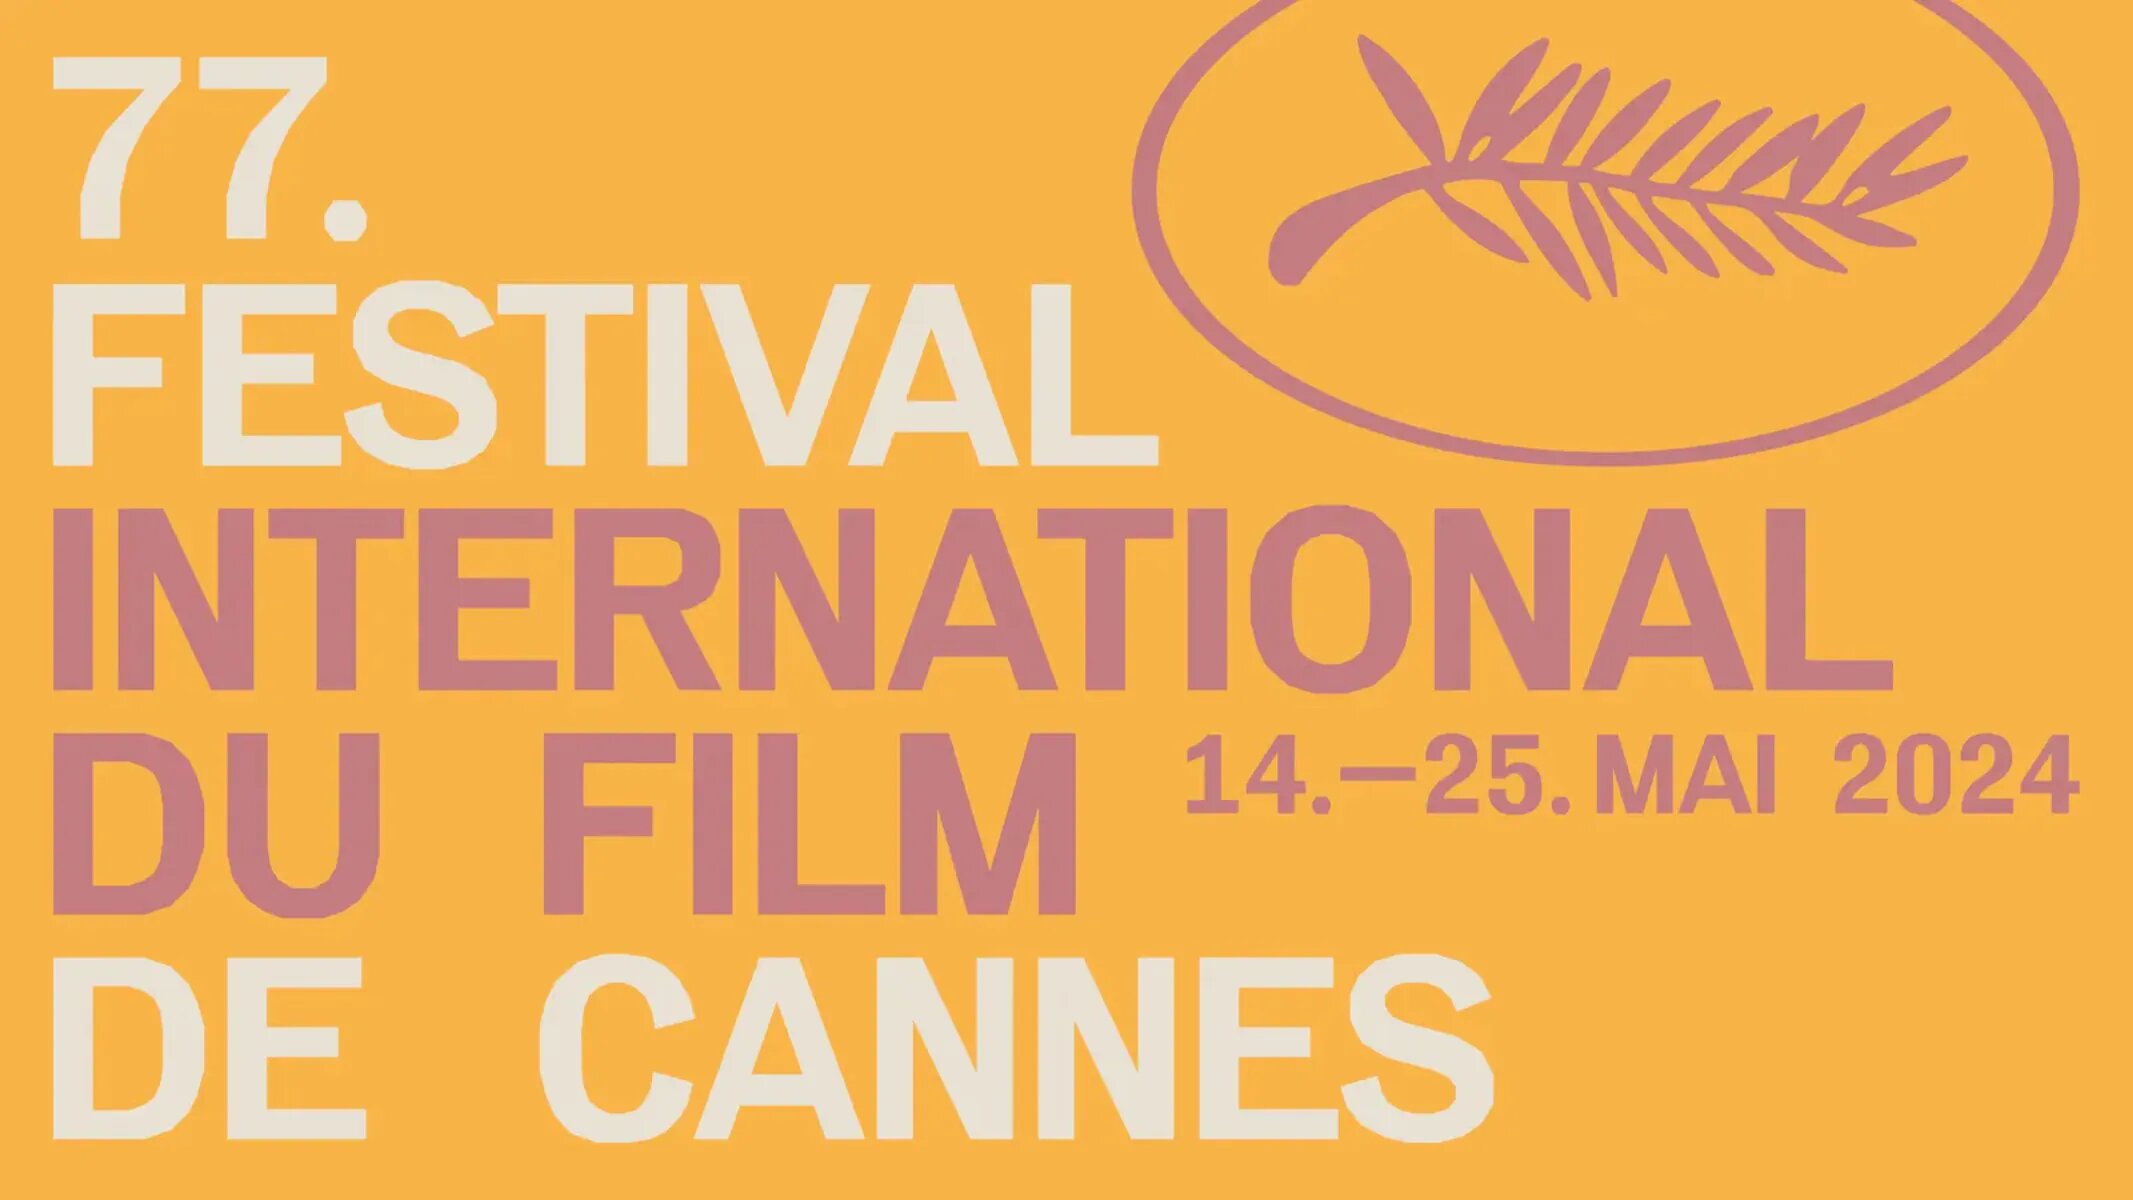 77 festival cannes 2024